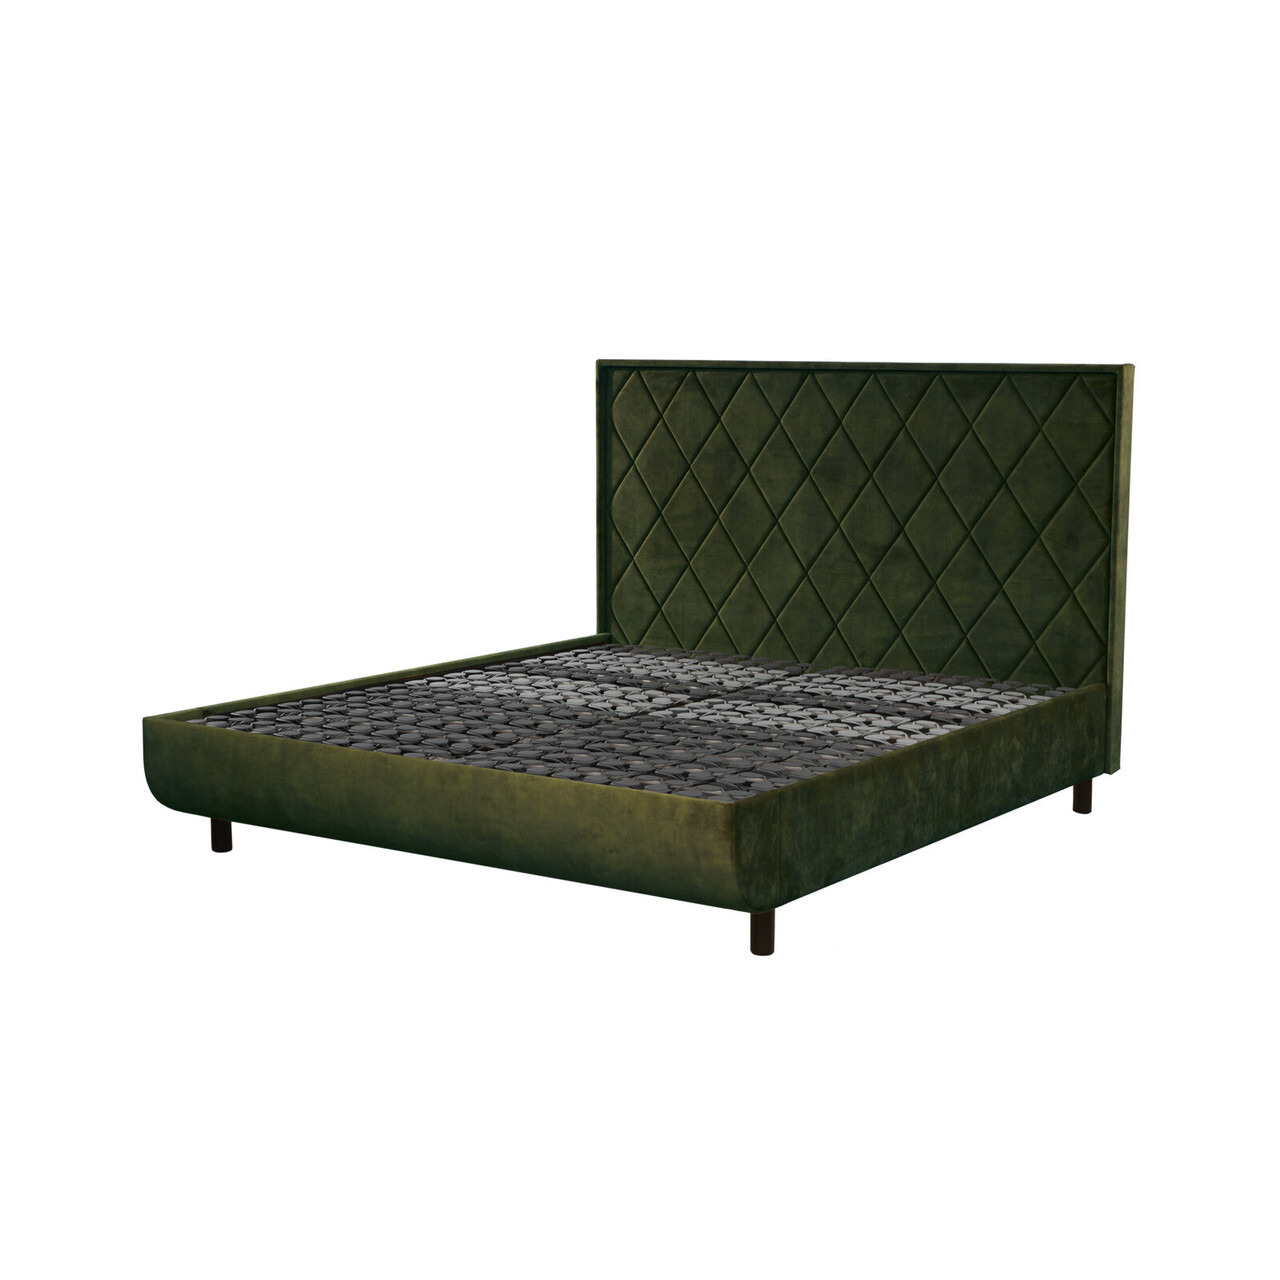 Tempur Arc™ Quilted Upholstered Bed Frame - image 1